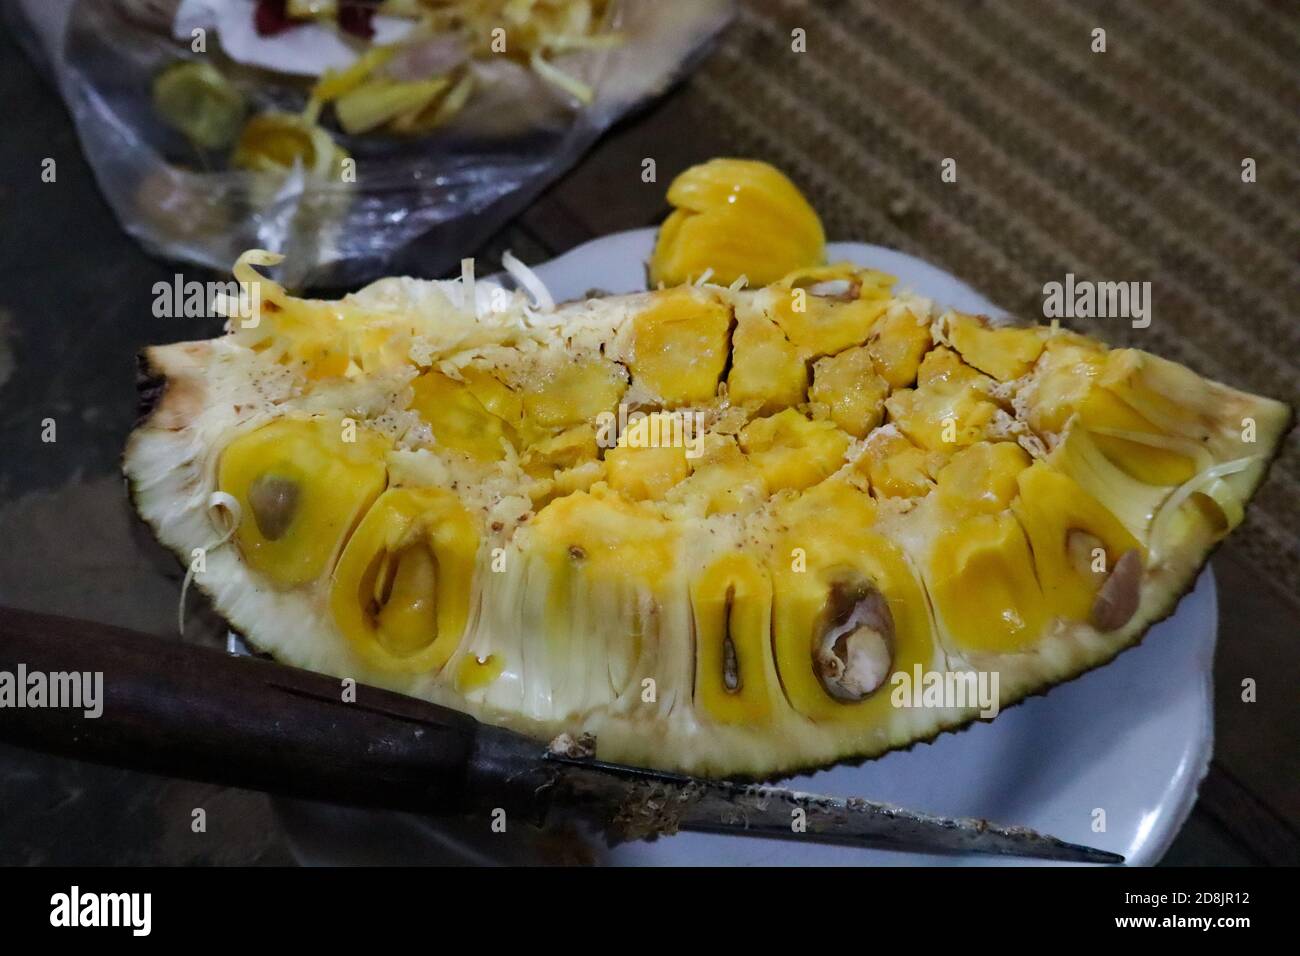 Yellow jackfruit slices are ready to be enjoyed, selective focus Stock Photo